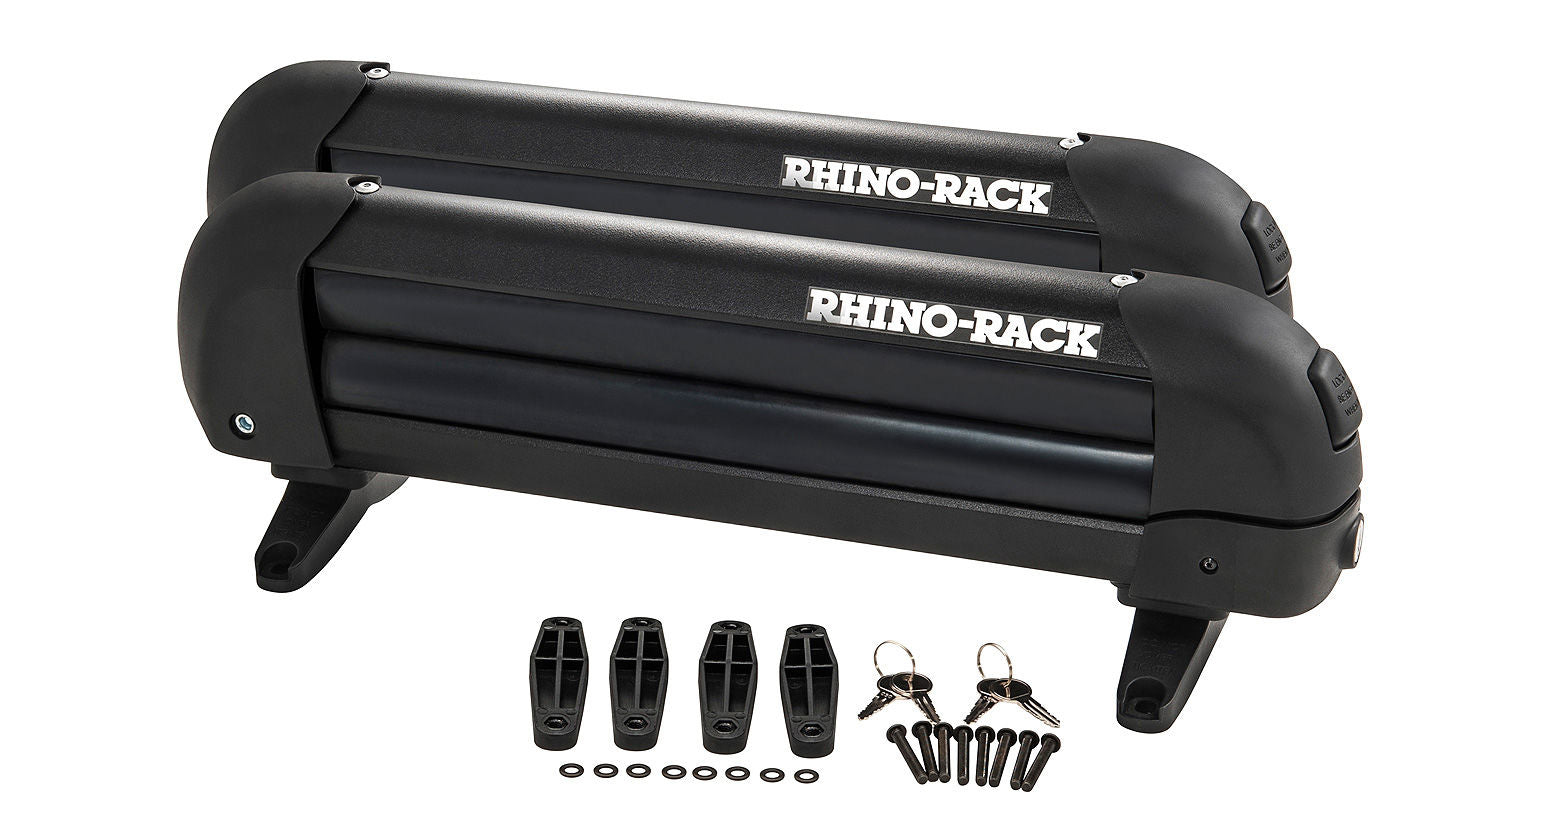 Rhino Rack 573 Ski and Snowboard Carrier - 3 skis or 2 snowboards